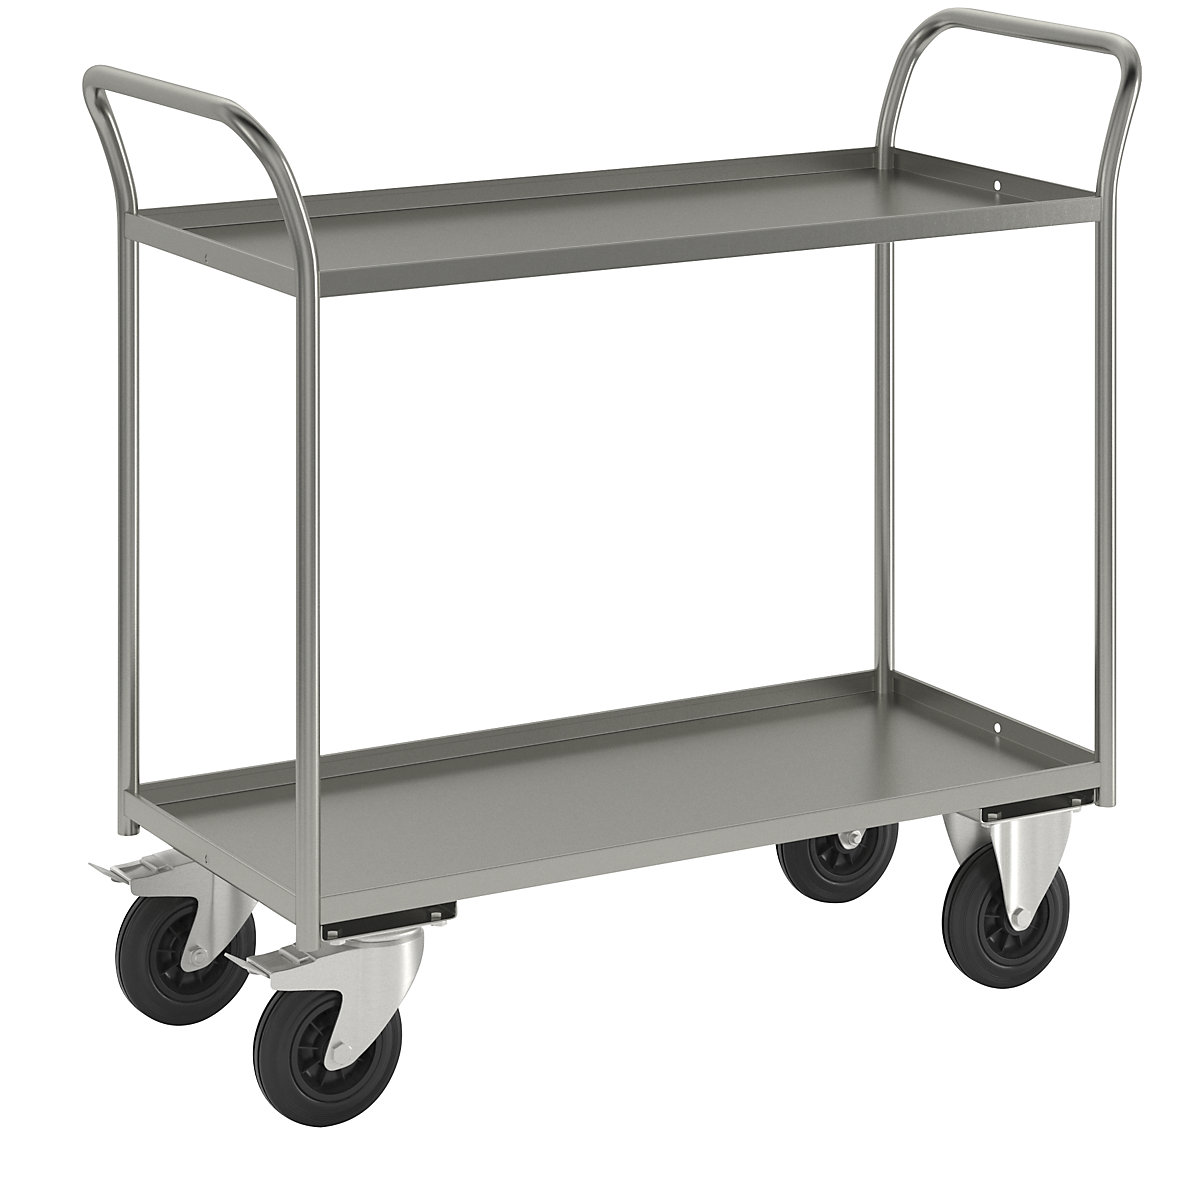 KM41 table trolley – Kongamek, 2 shelves with raised edges, LxWxH 1080 x 450 x 1000 mm, zinc plated, 2 swivel castors with stops, 2 fixed castors-4